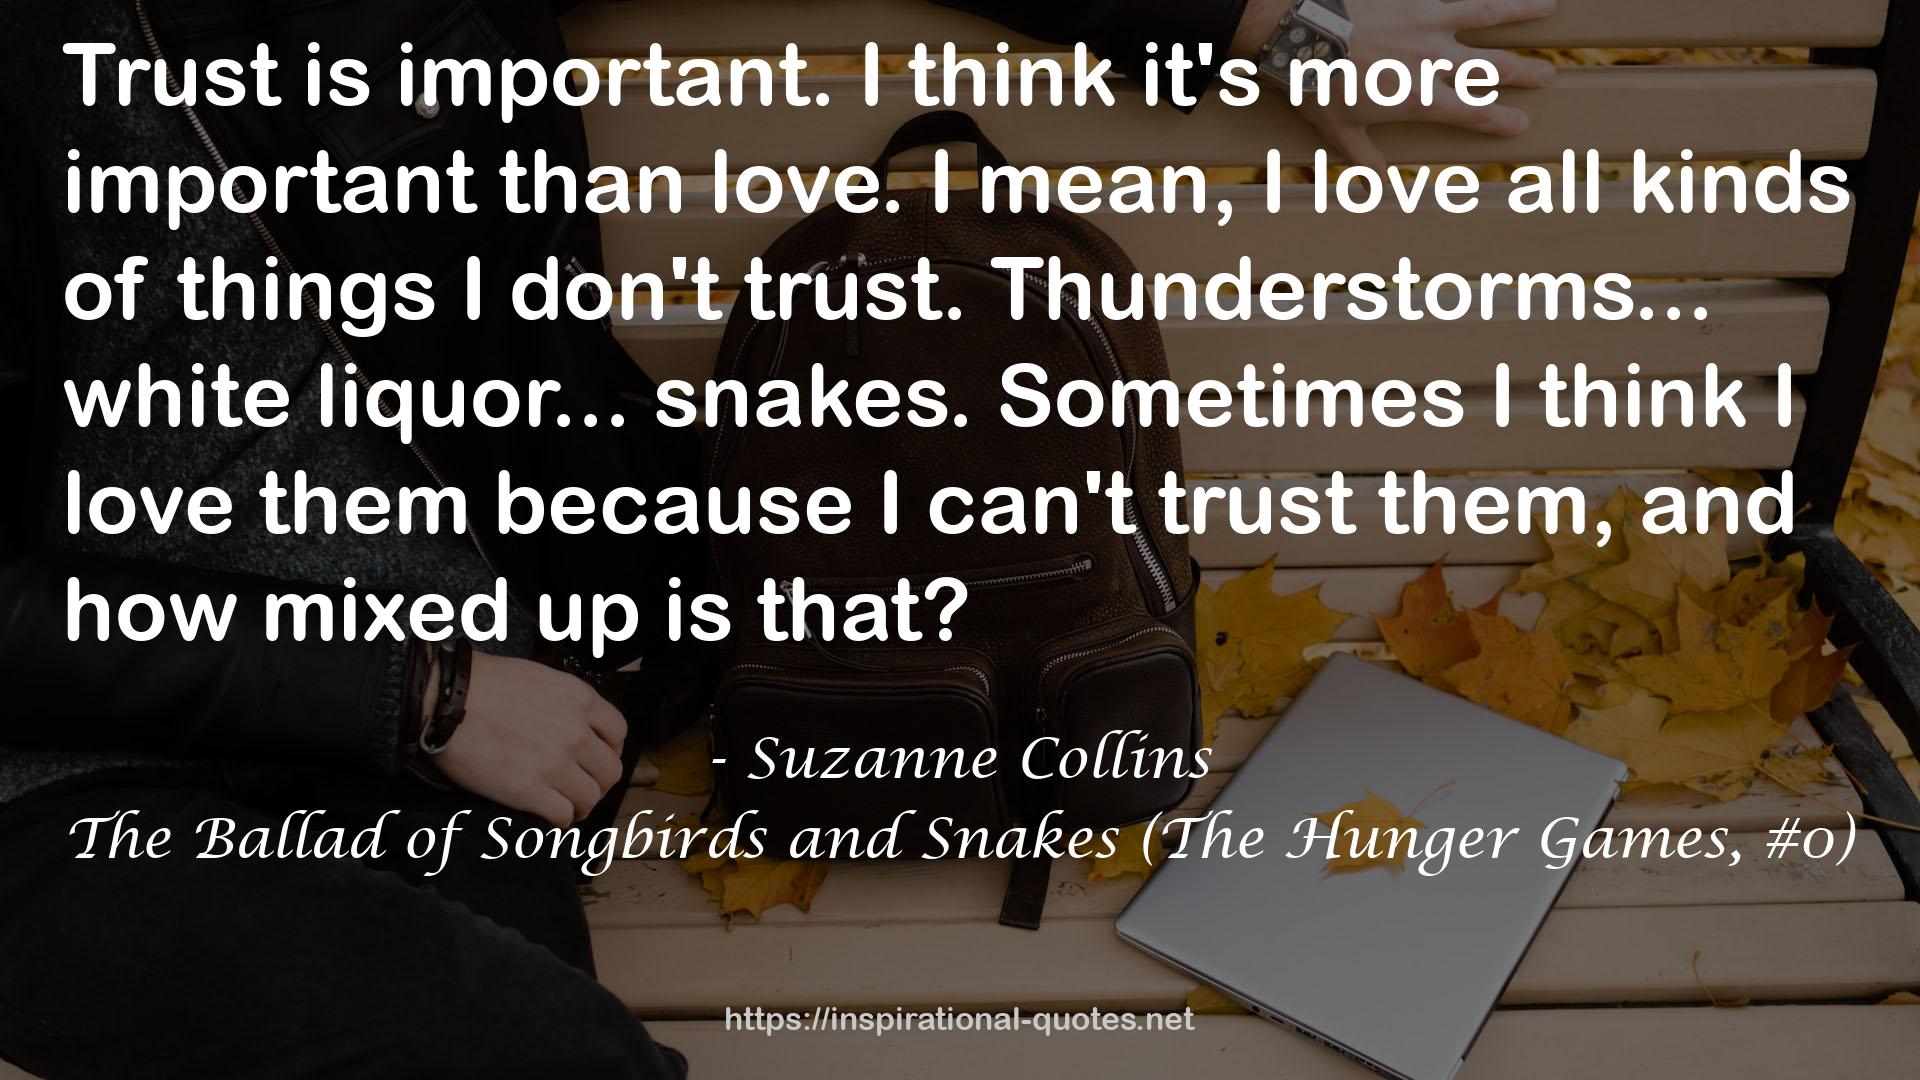 The Ballad of Songbirds and Snakes (The Hunger Games, #0) QUOTES